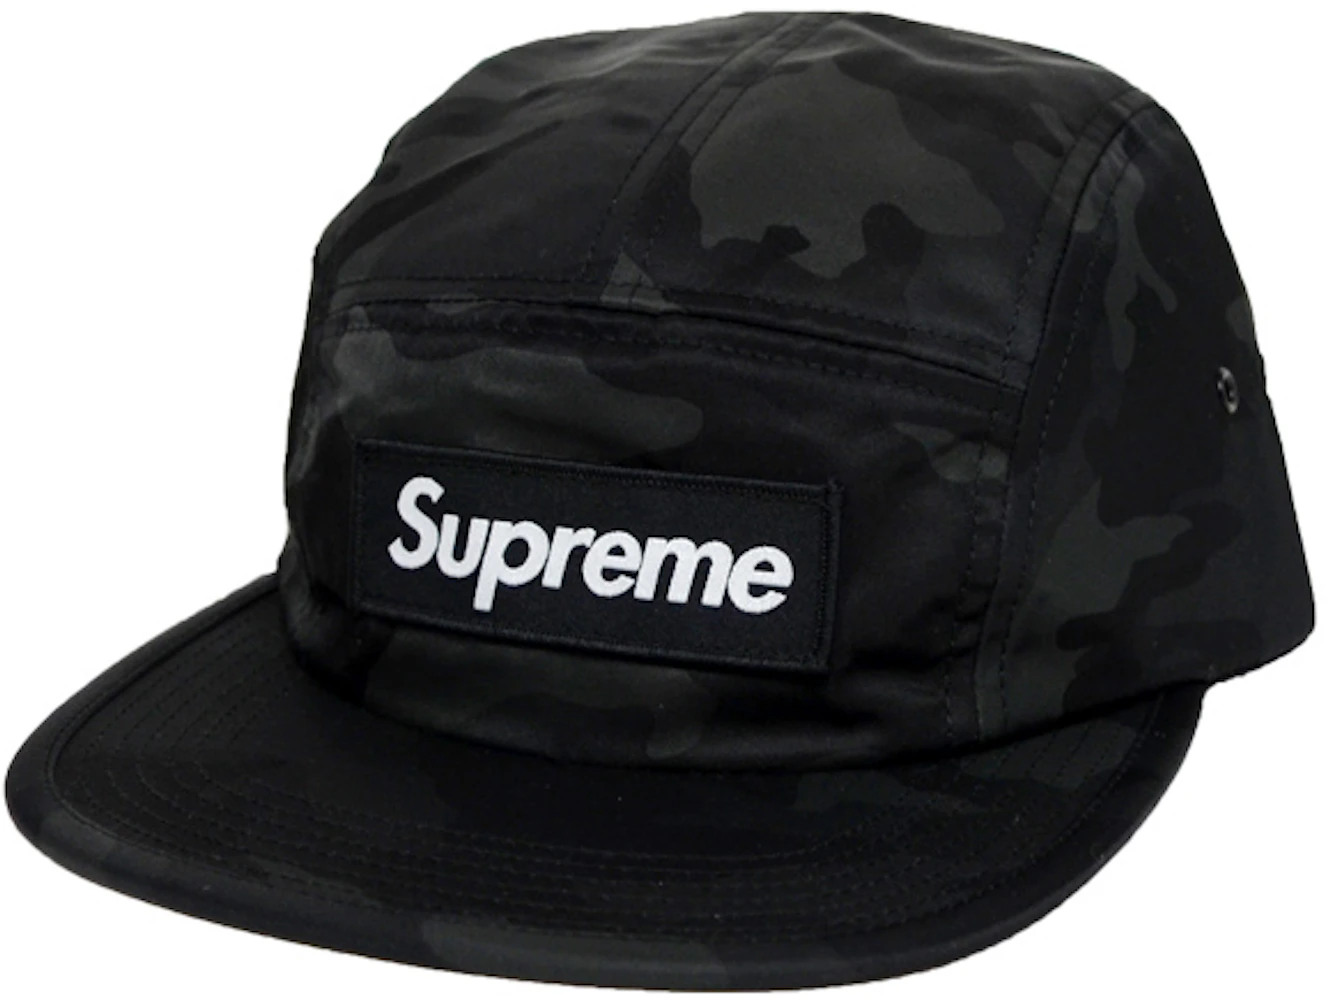 Shop Supreme 2016-17FW Camouflage Street Style Skater Style Hats